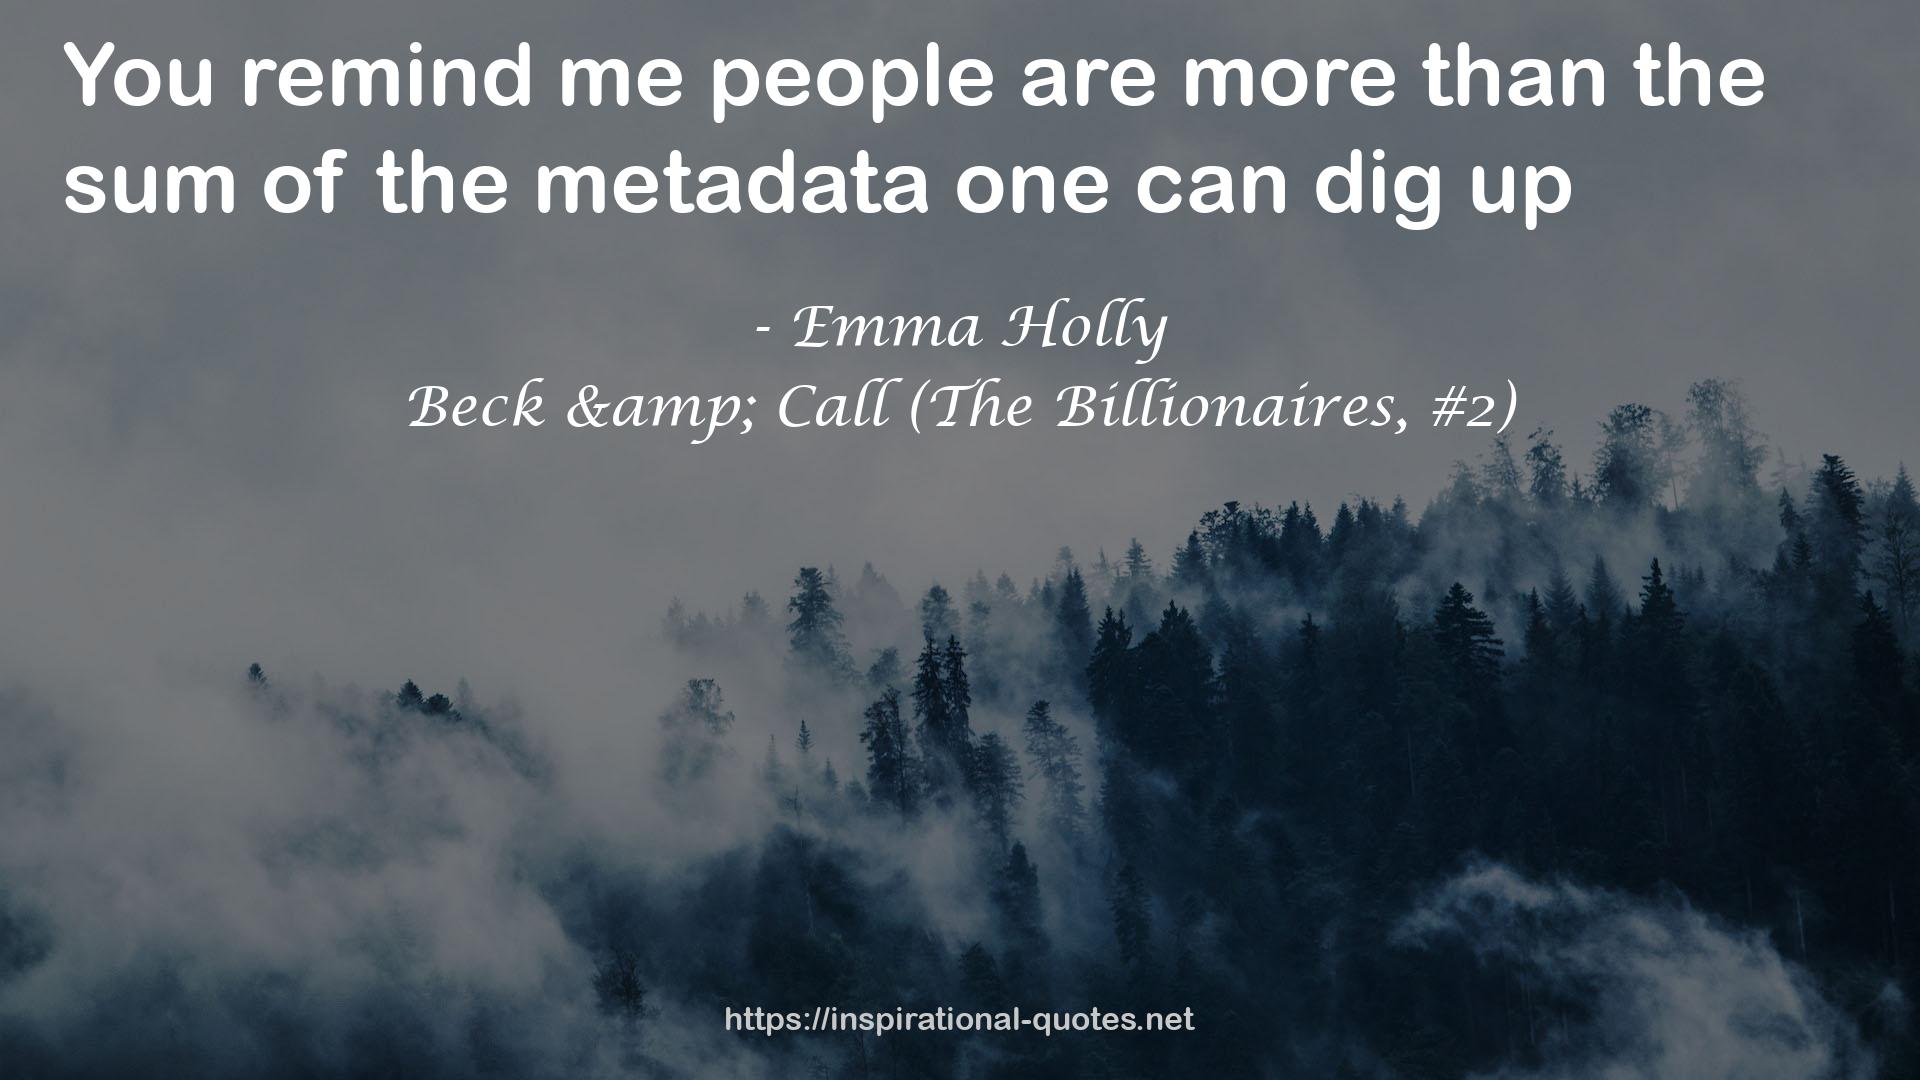 Beck & Call (The Billionaires, #2) QUOTES